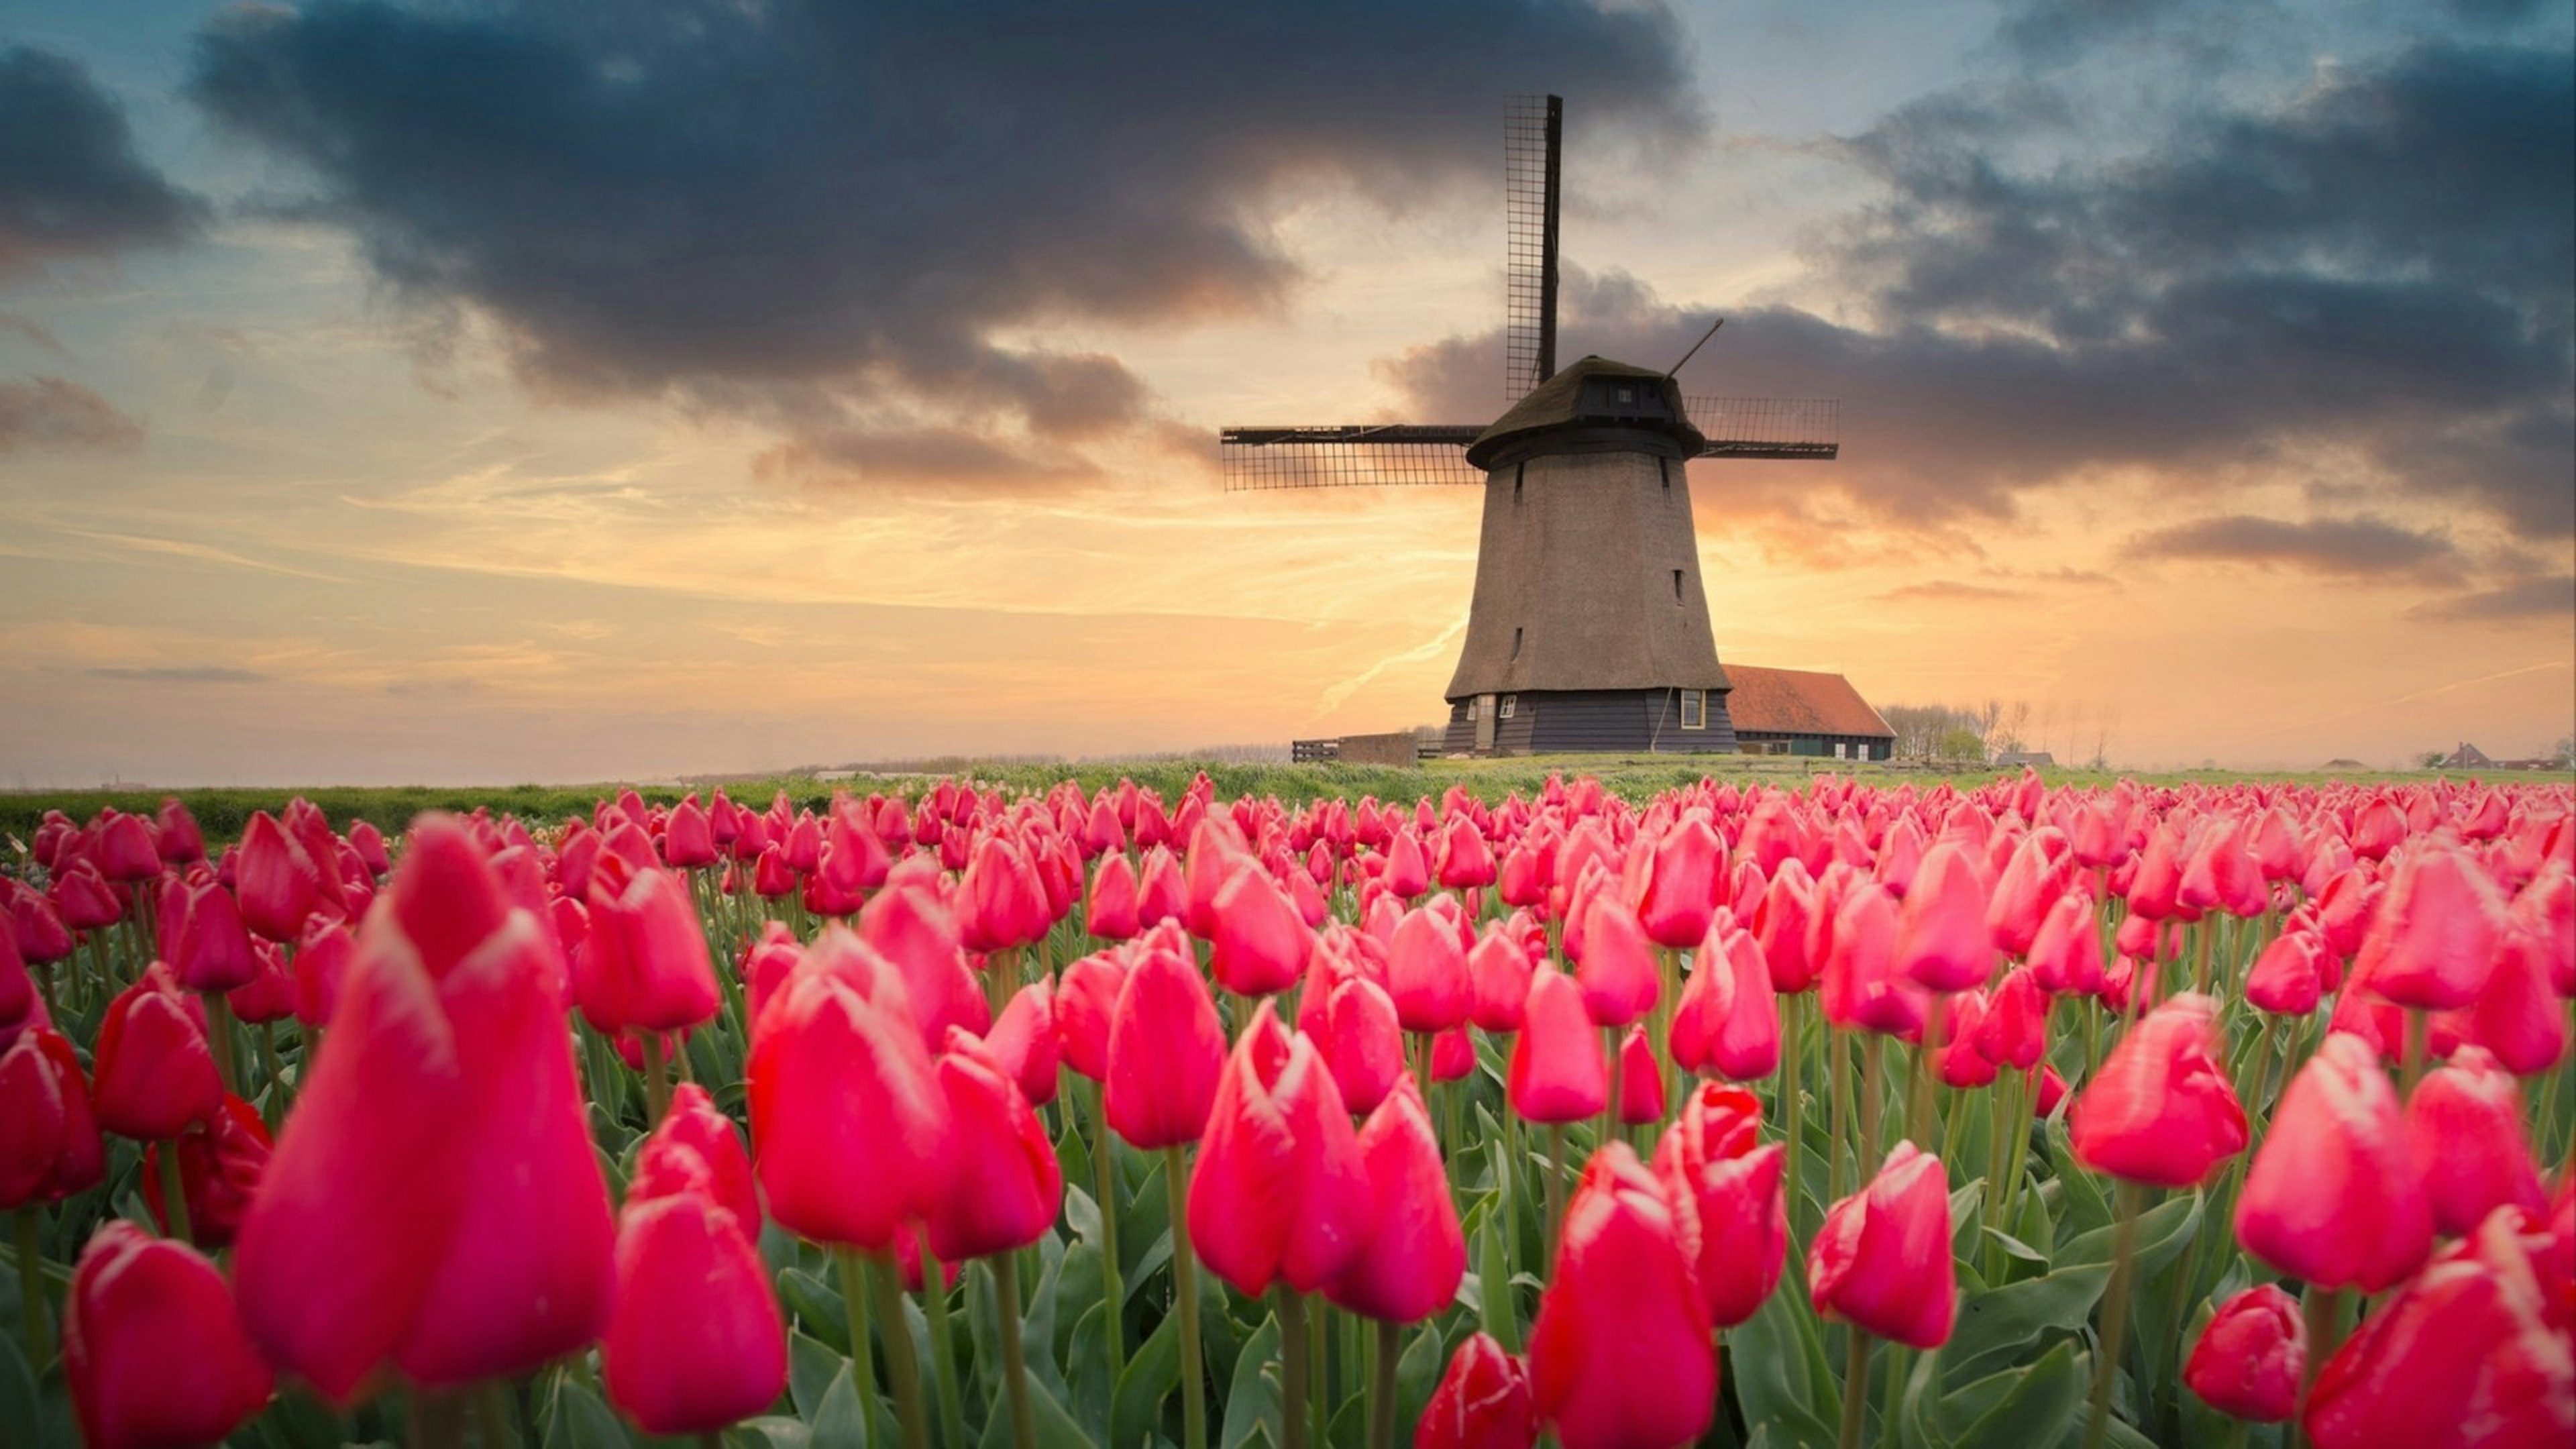 Tulip fields and windmill in Netherland